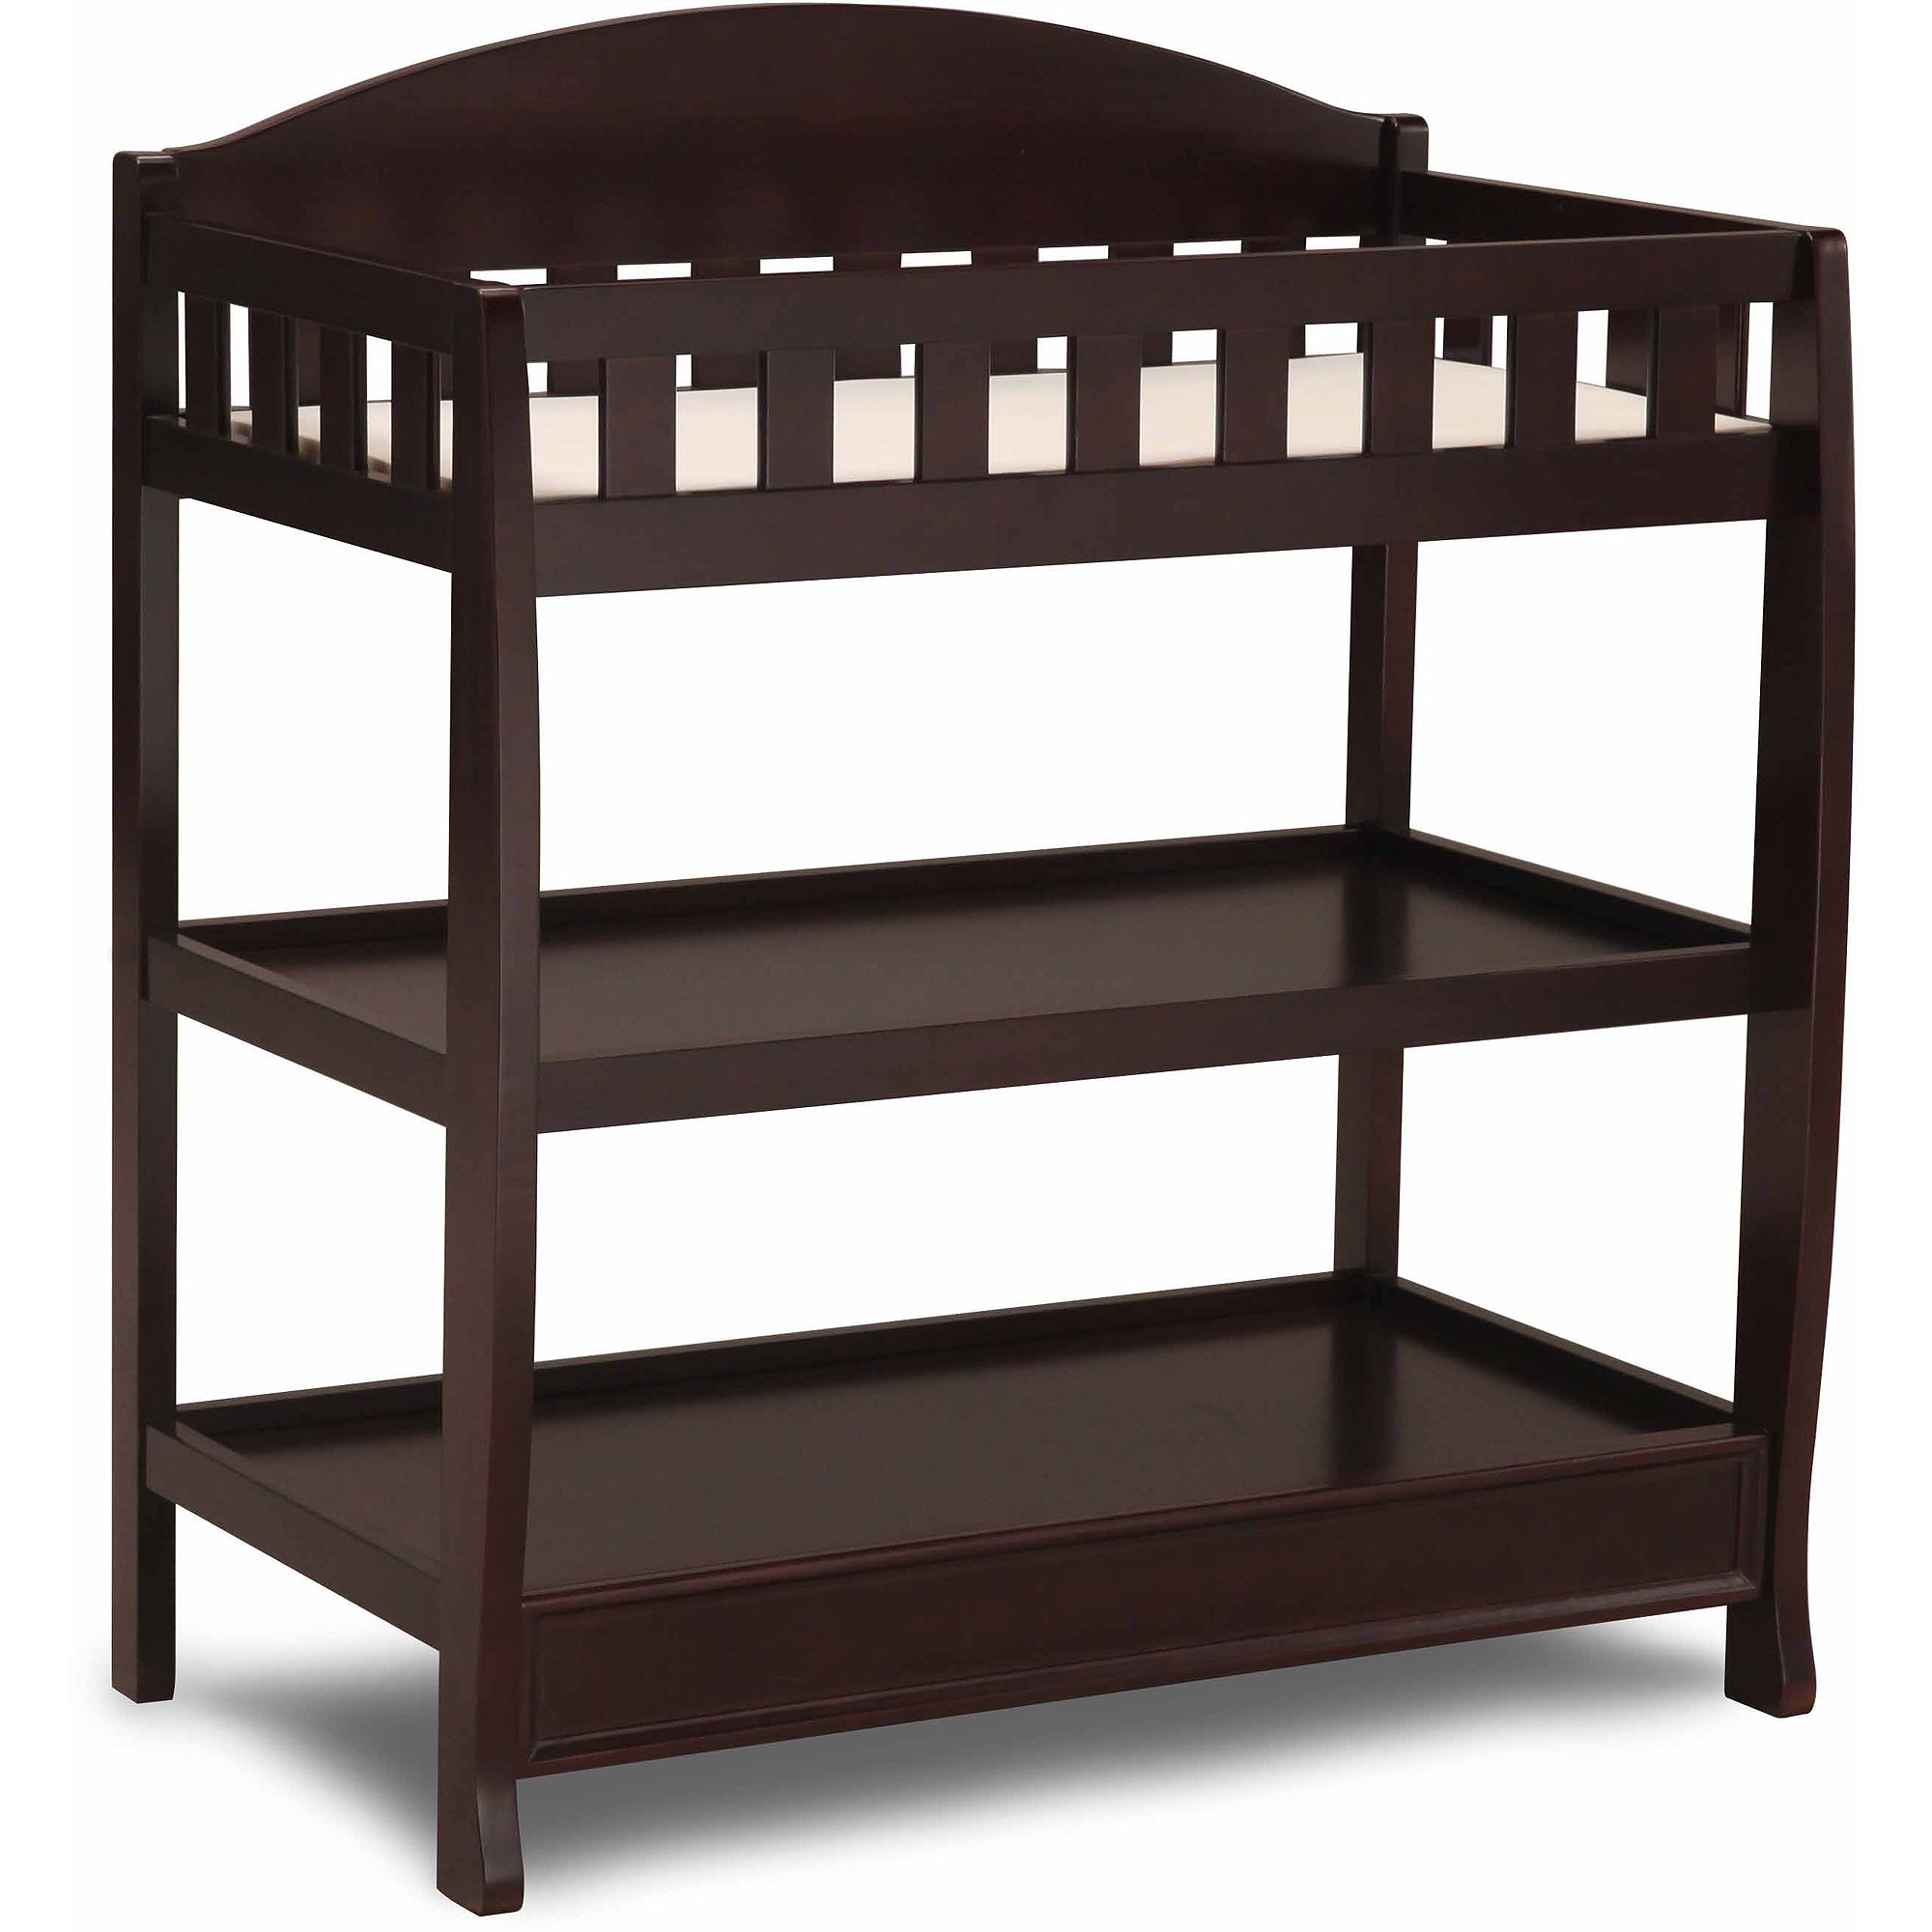 Delta Children Wilmington Changing Table with Pad, Dark Chocolate - image 1 of 5